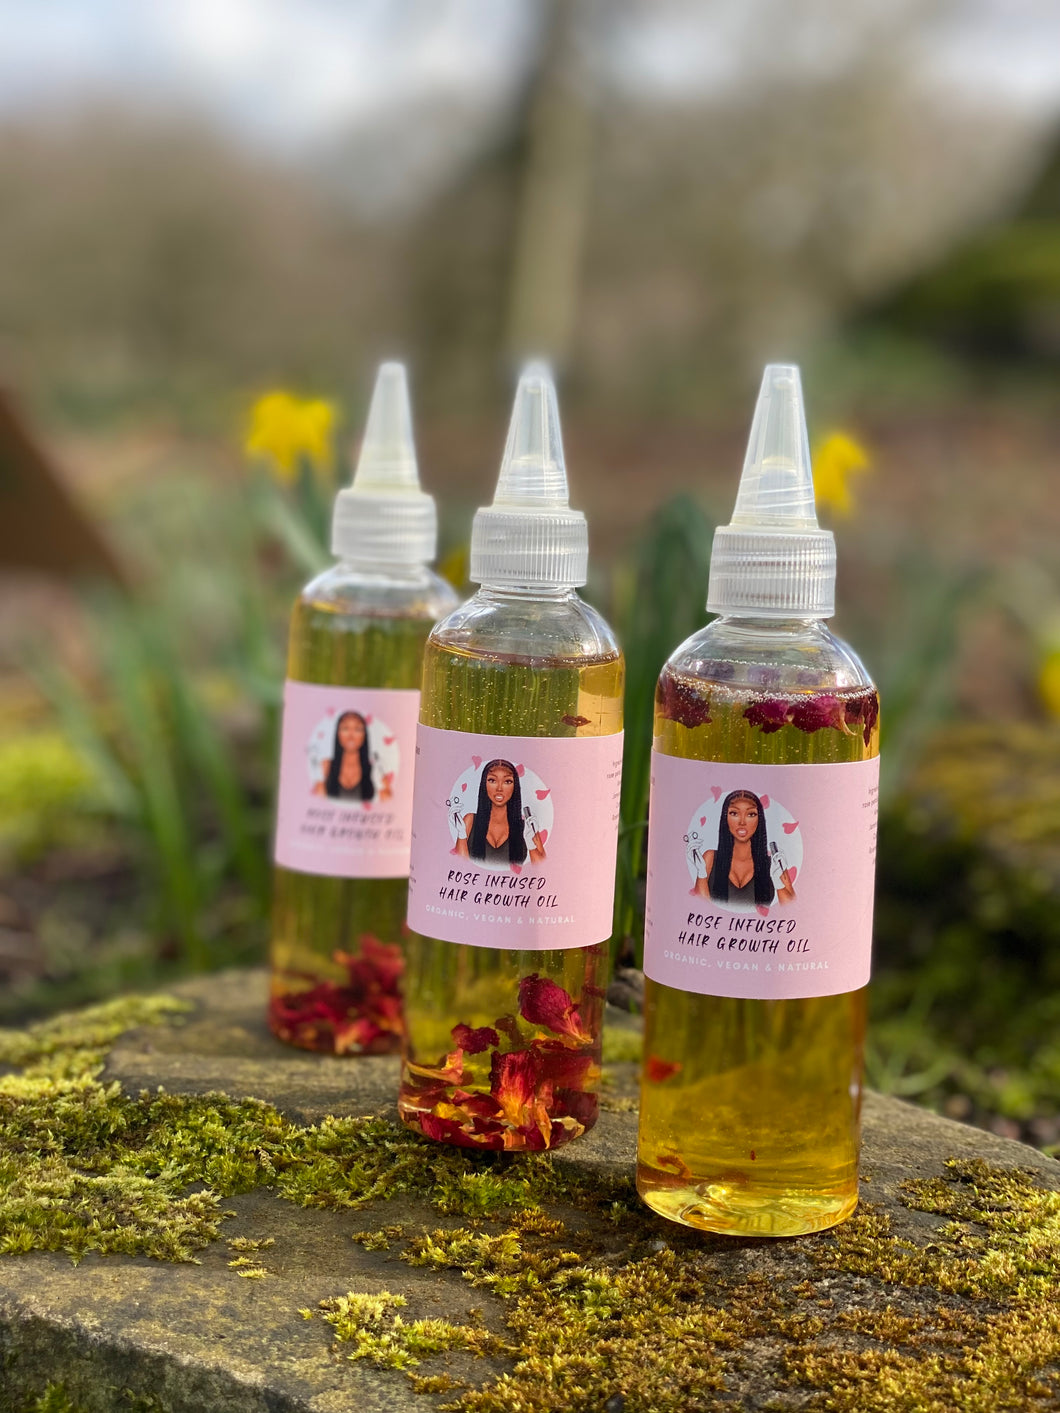 ROSE INFUSED HAIR GROWTH OIL